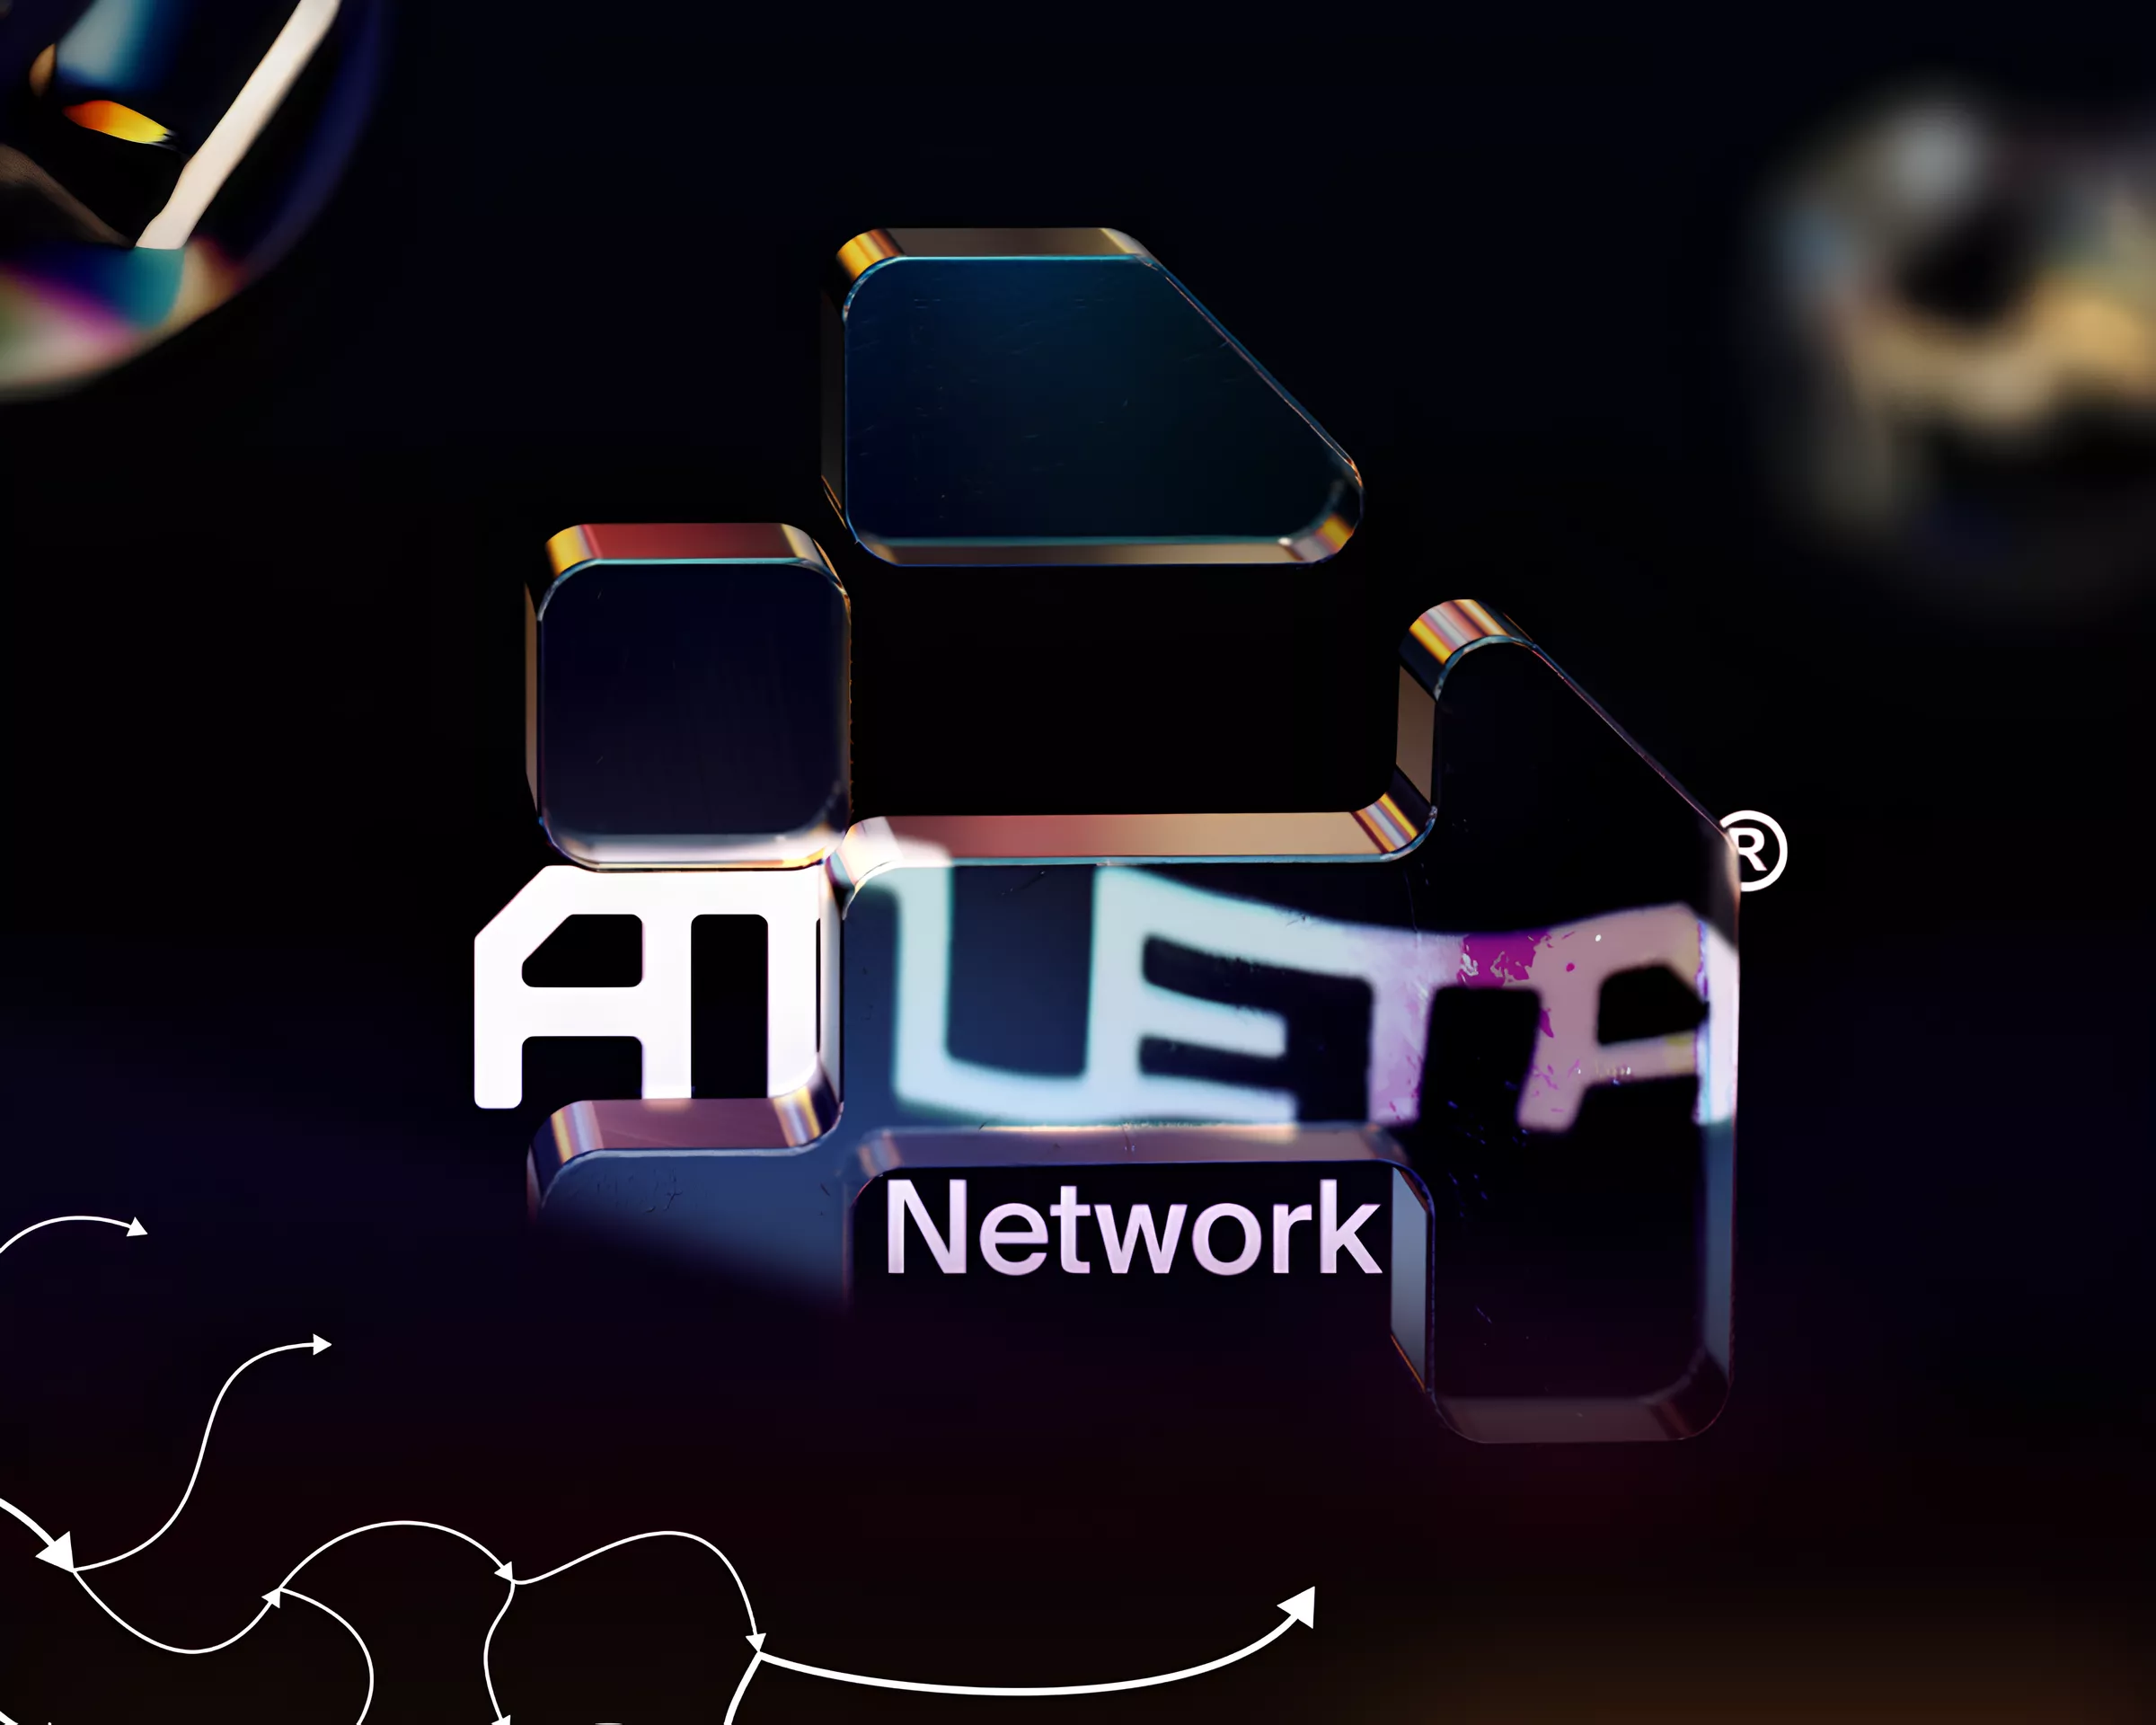 The Atleta Network team announced the launch of the testnet